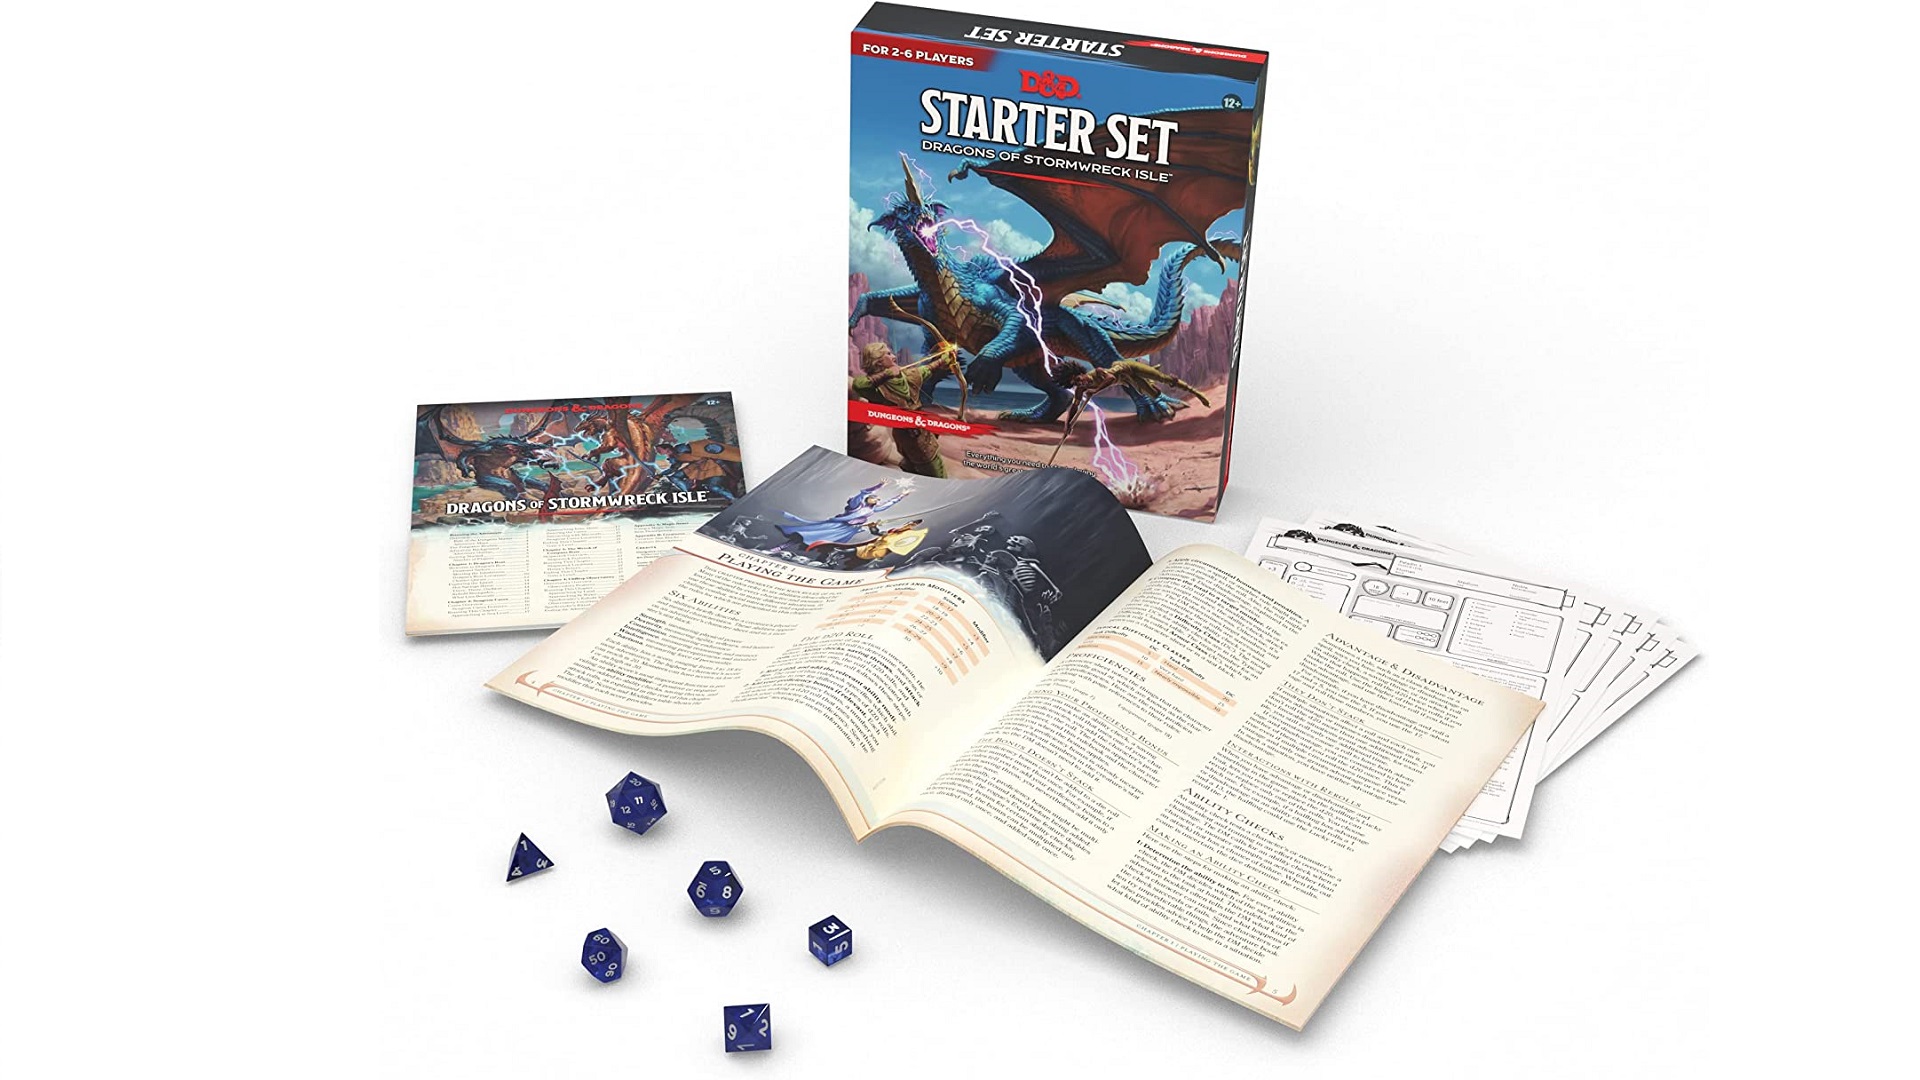 Wizards of the Coast Charity partnership bringing D&D to 200 classrooms